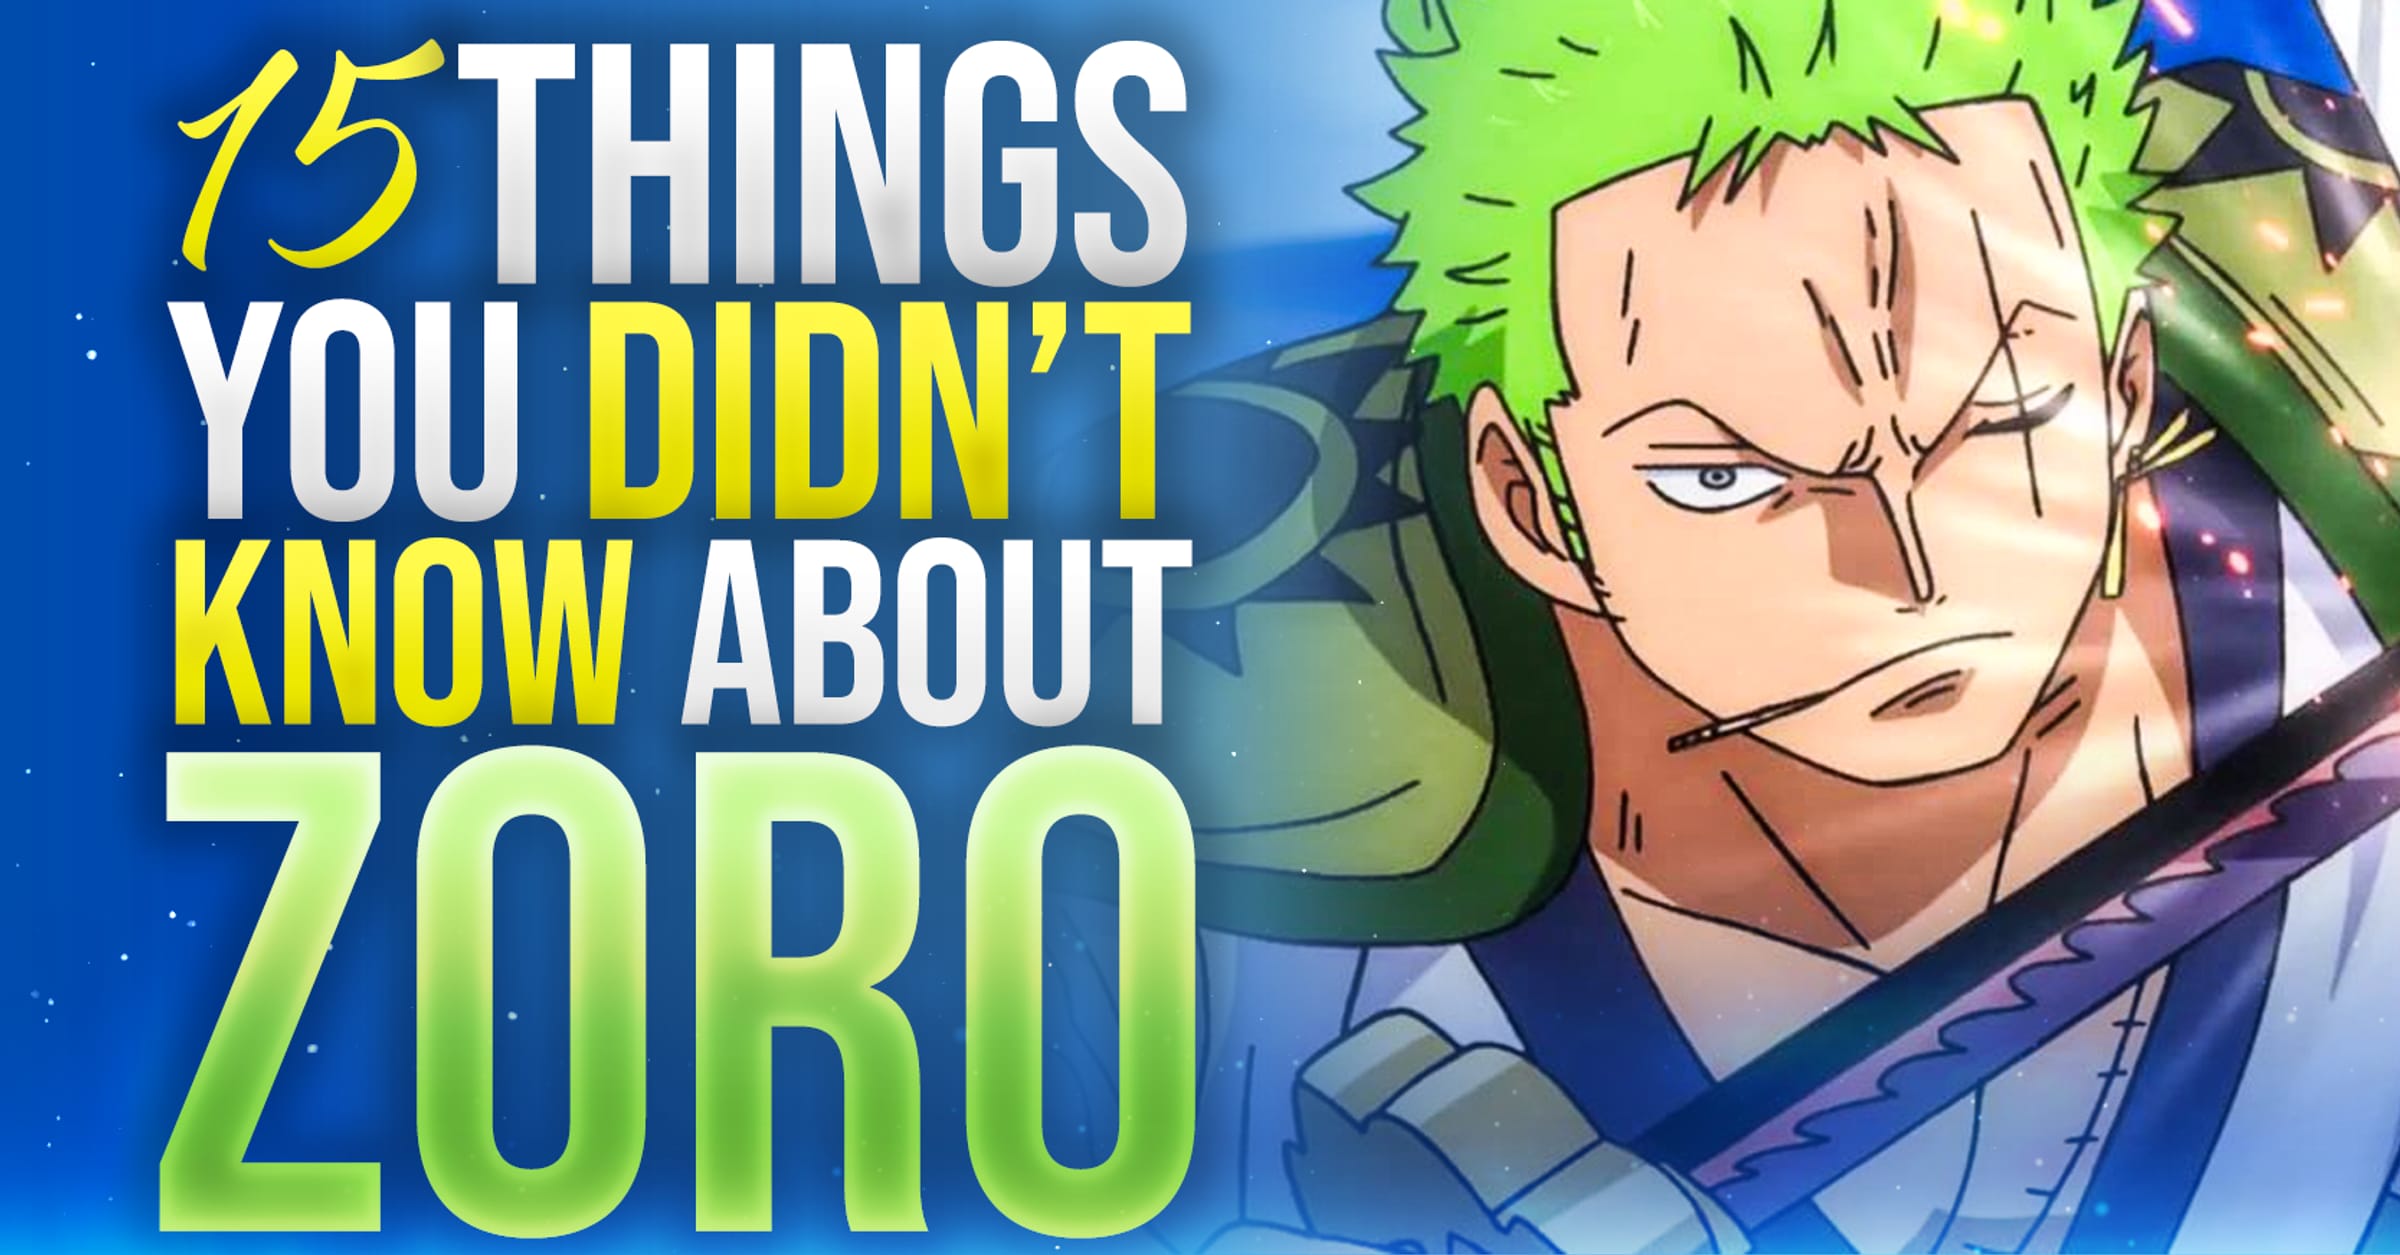 One Piece: Roronoa Zoro's Name Was Inspired By a Real-Life Pirate